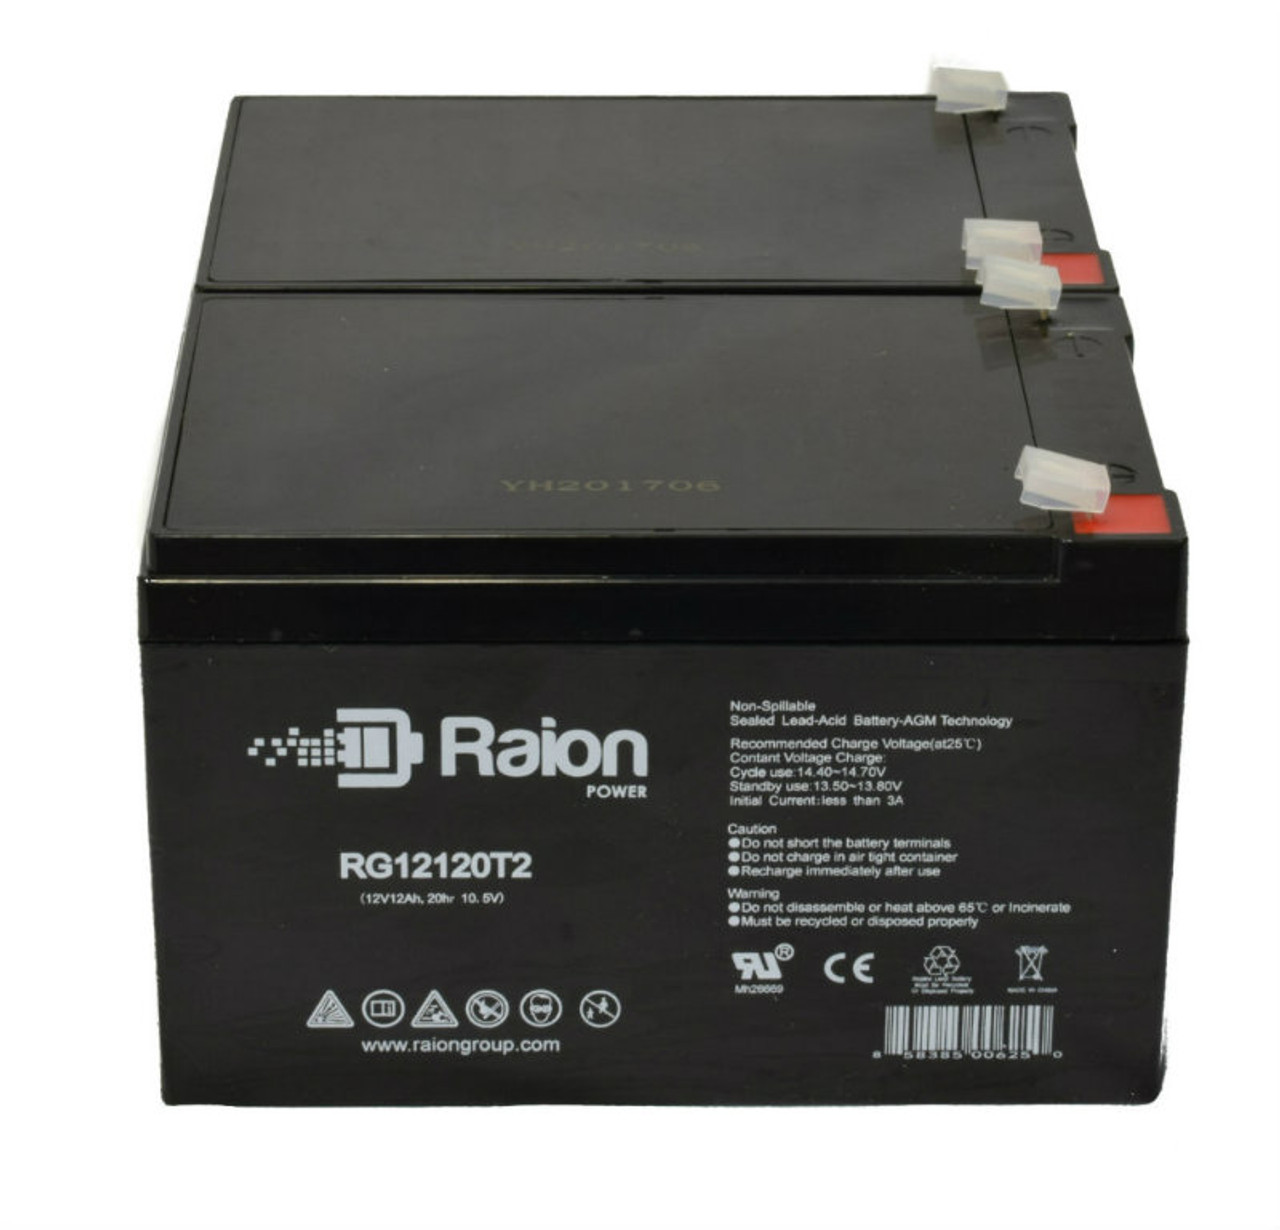 Raion Power 12V 12Ah Non-Spillable Compatible Replacement Battery for Ostar Power OP12120 - (2 Pack)